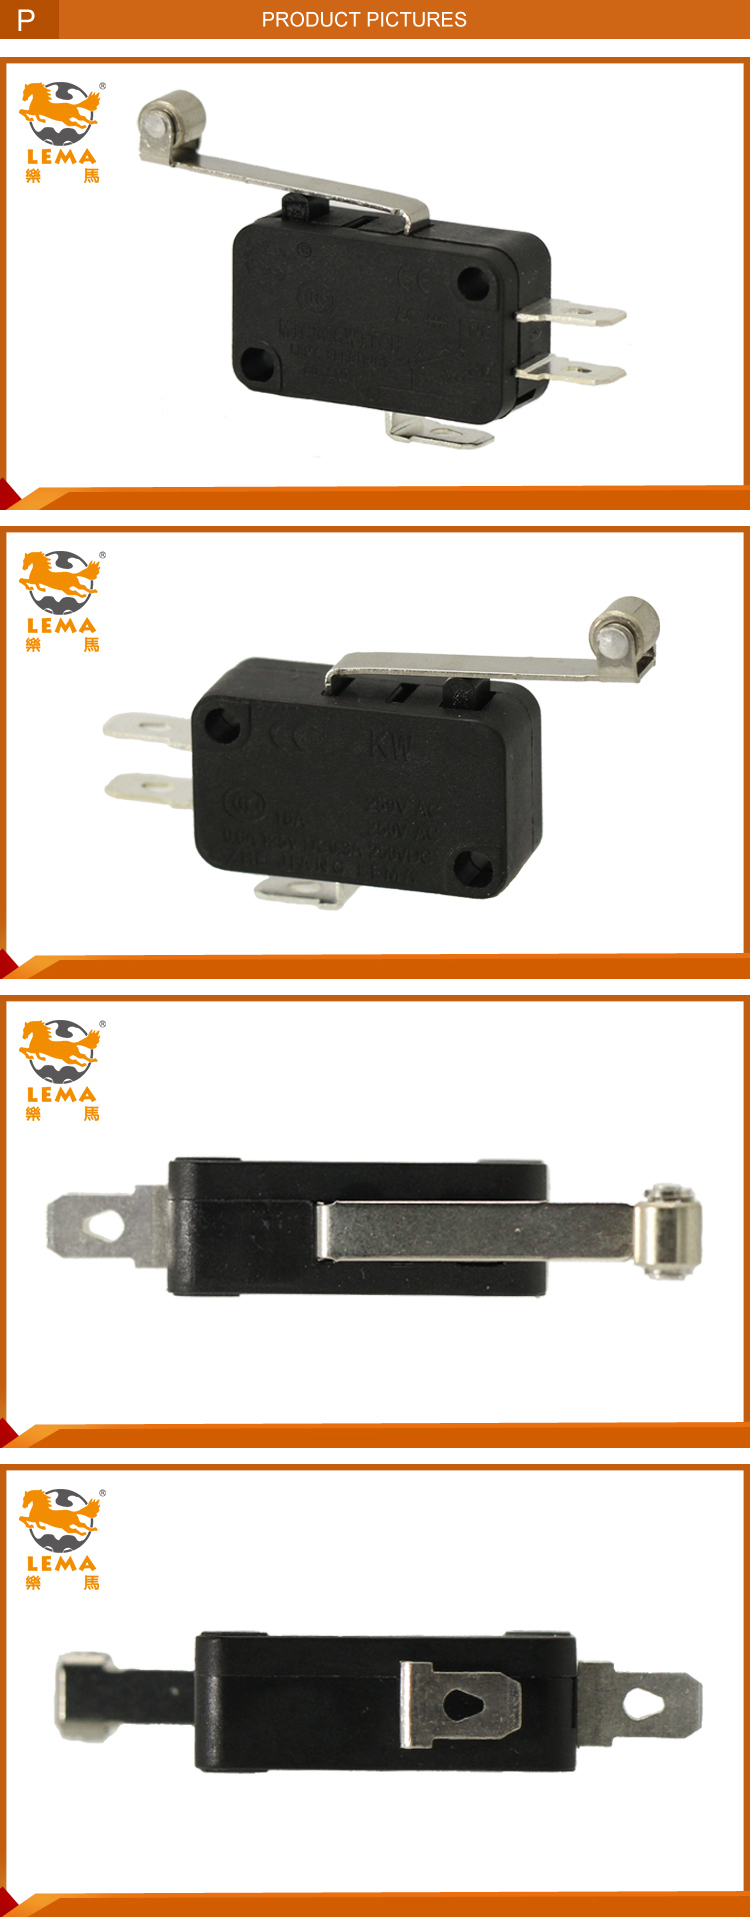 Lema Kw-7-2 Long Metal Roller Lever CCC Ce UL VDE Micro Switch